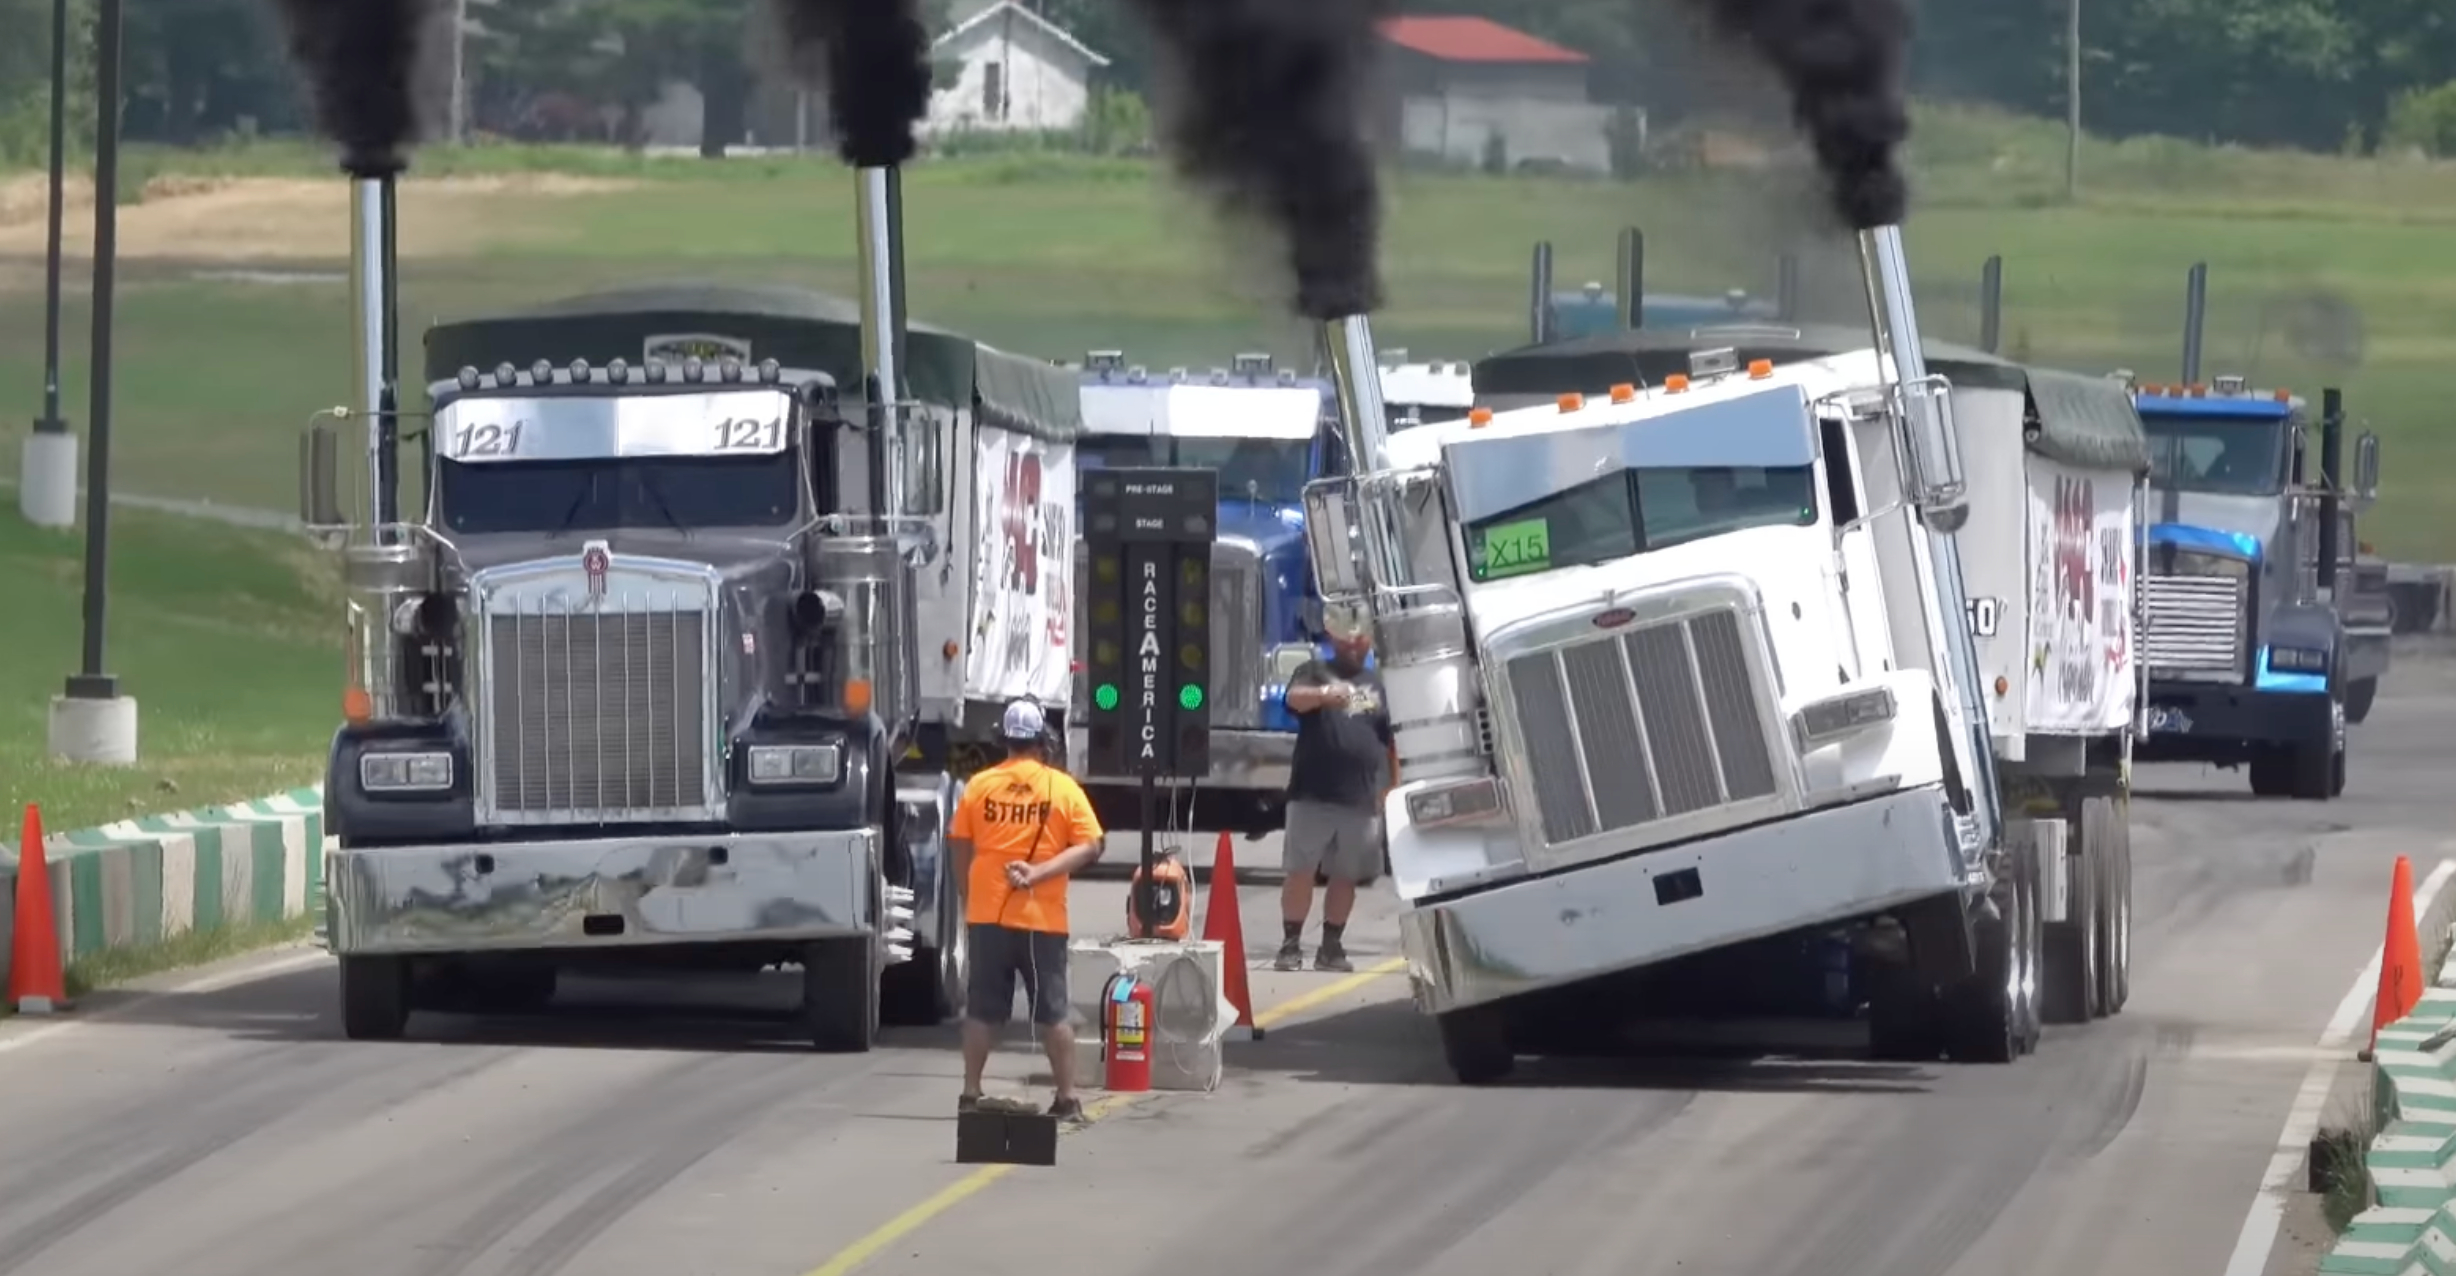 In America they drag race with 19-liter V8 diesel trucks